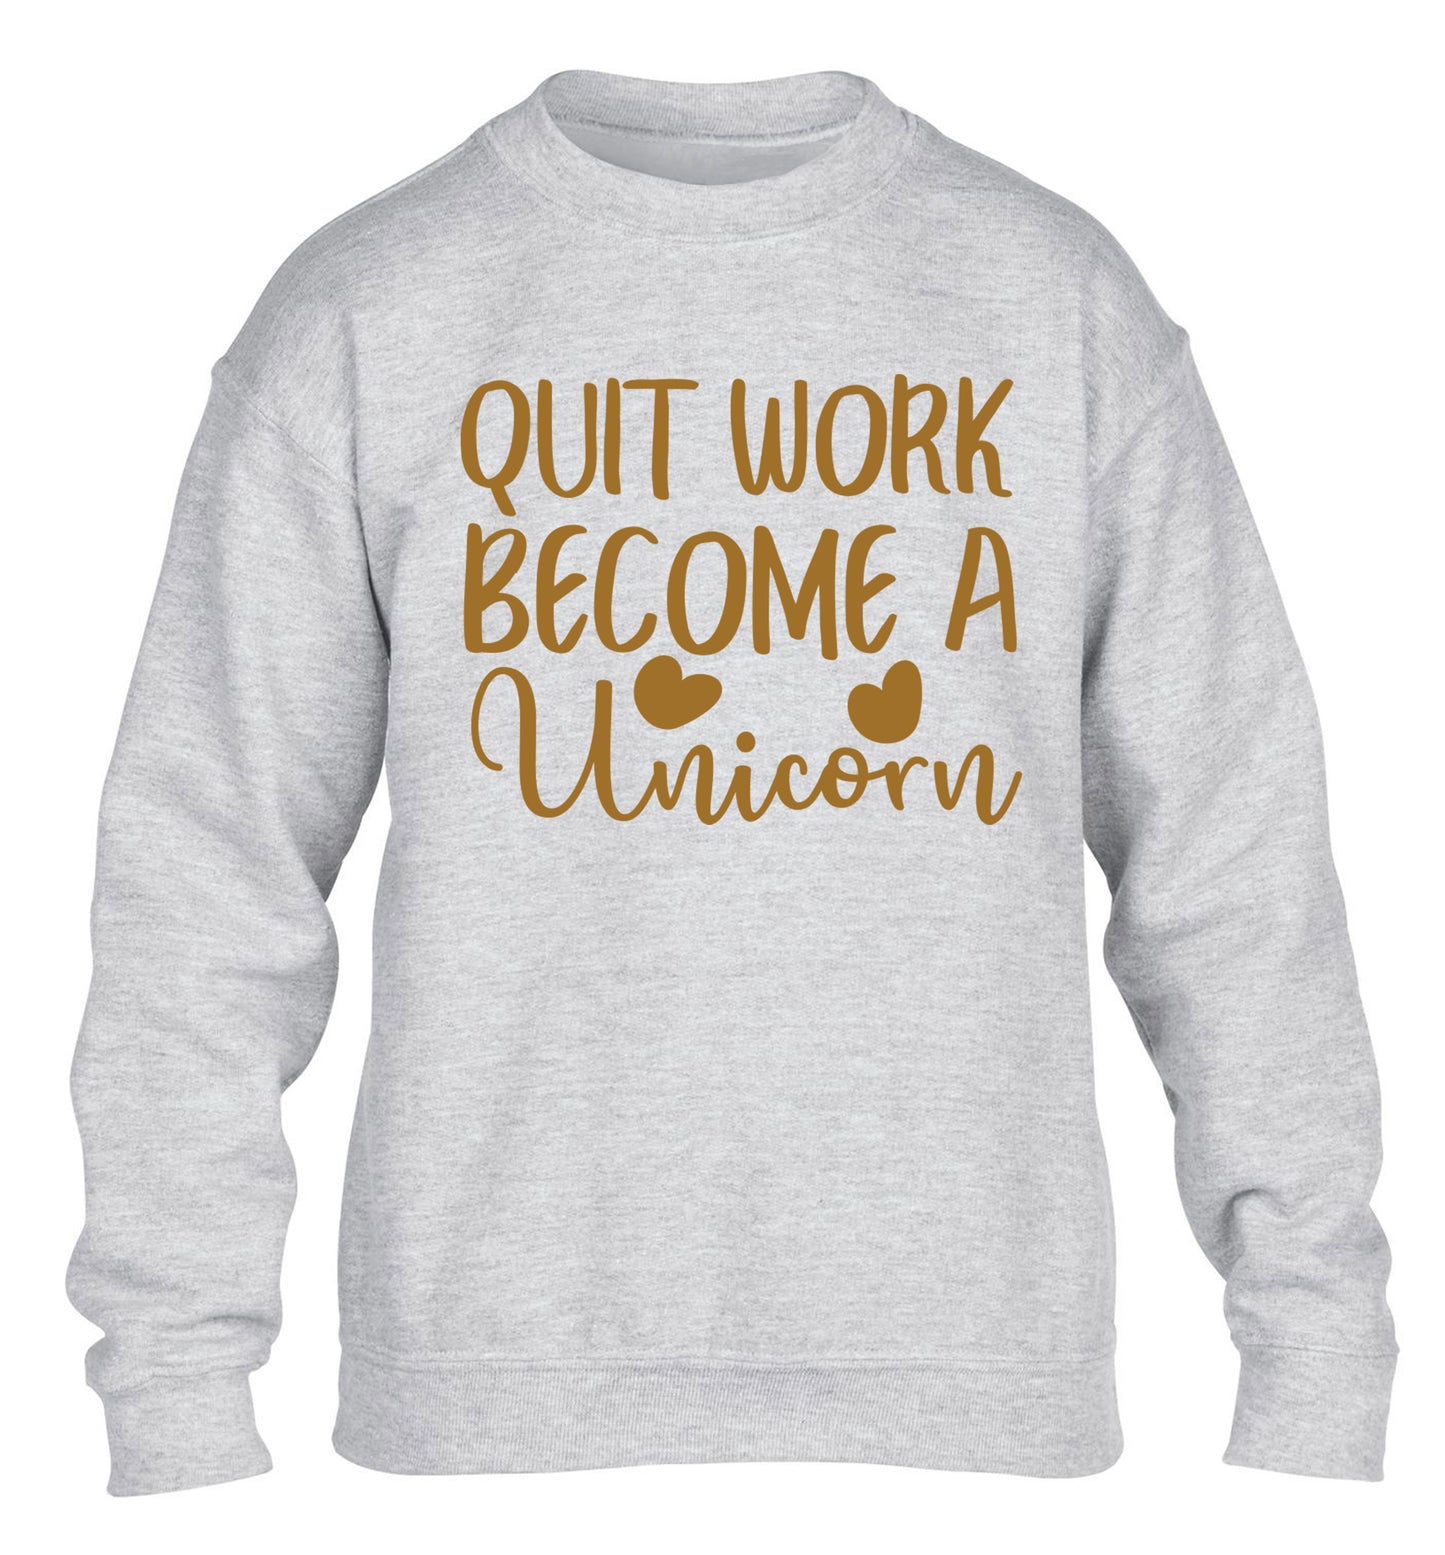 Quit work become a unicorn children's grey sweater 12-13 Years